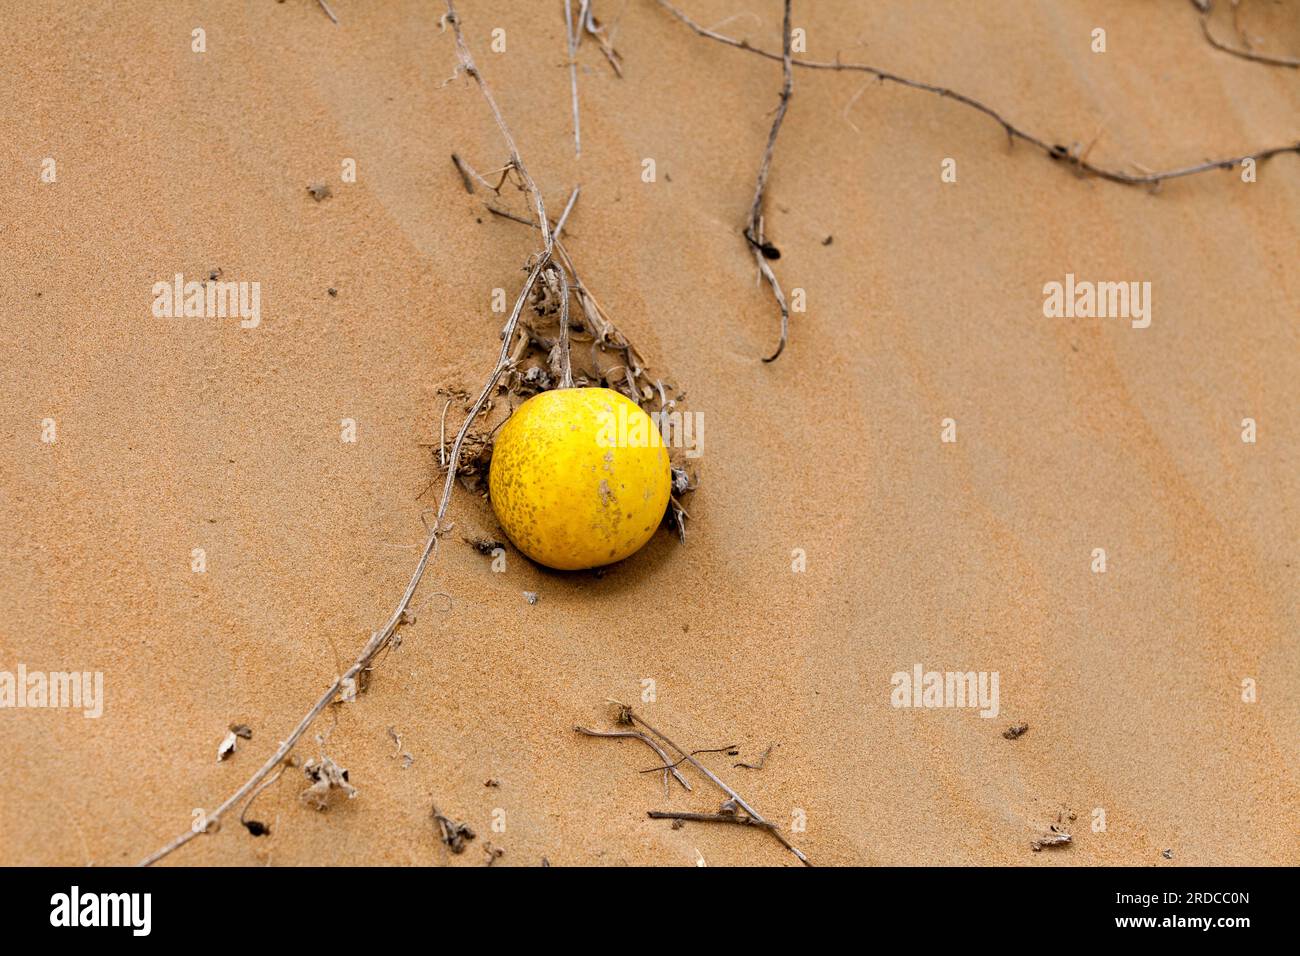 Yellow desert squash (Citrullus colocynthis) growing on a sand dune in the Liwa desert outside Dubai. Stock Photo